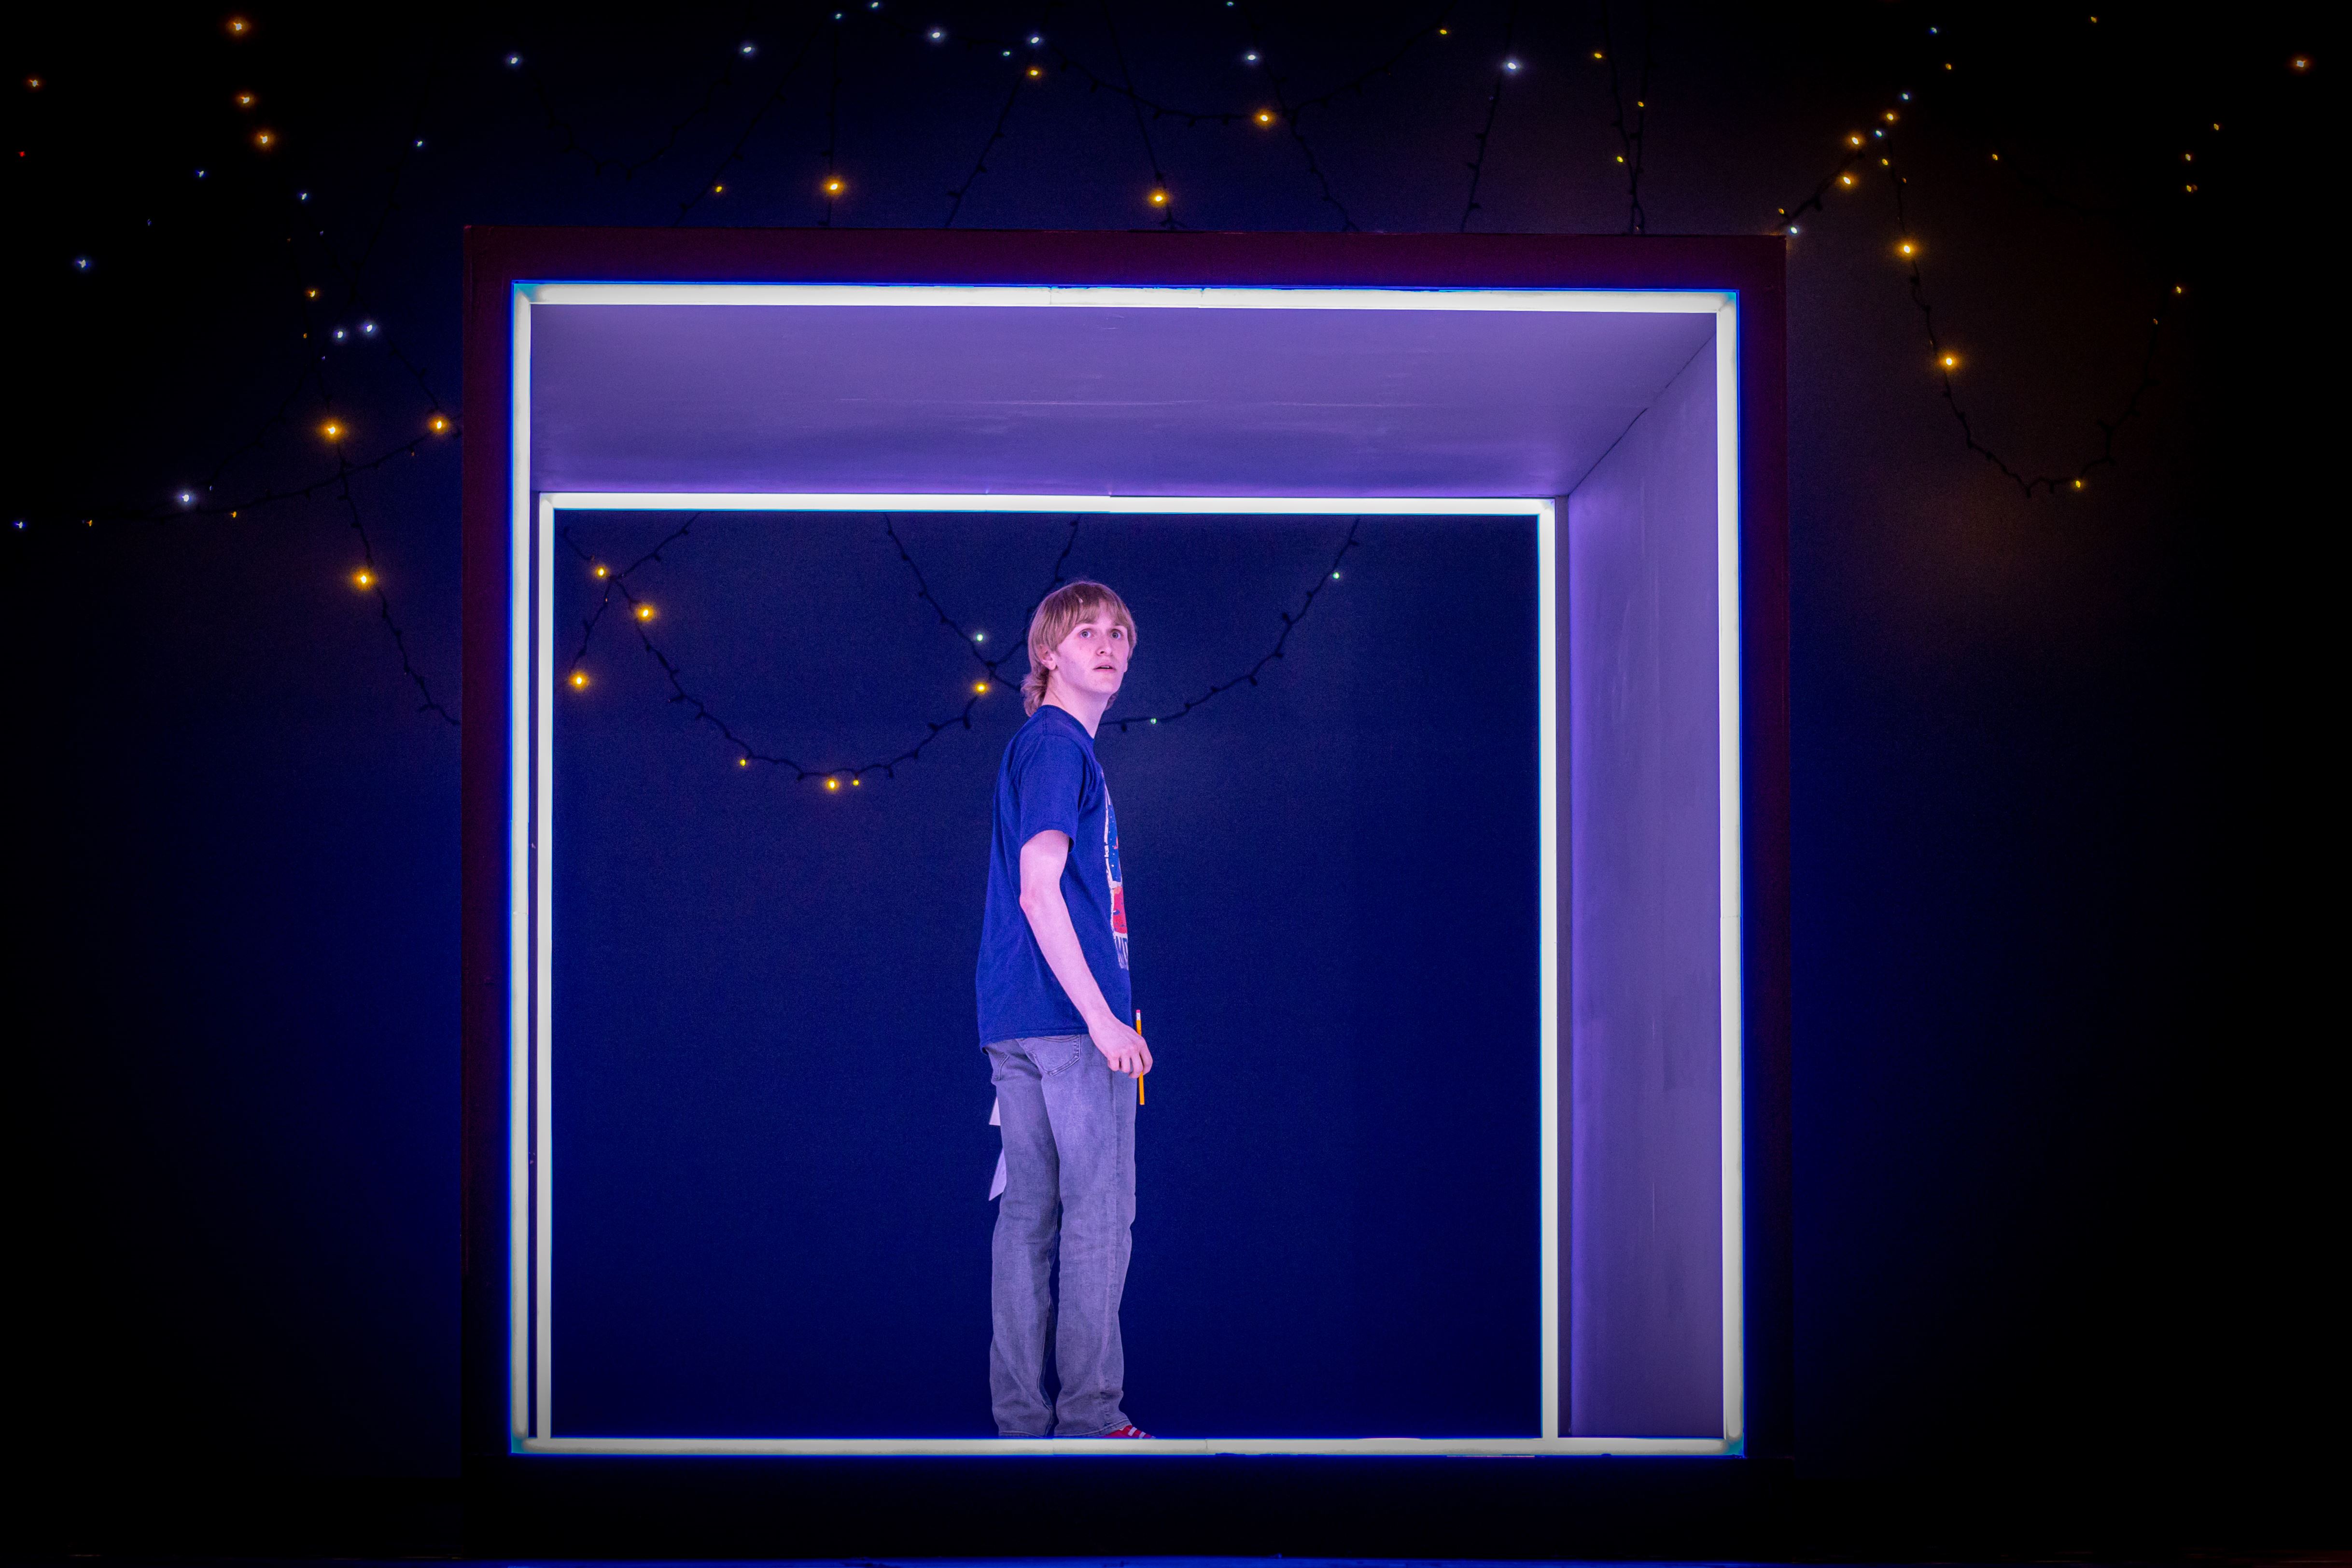 Christopher (Andrew Linden) stands alone in an illuminated cube.